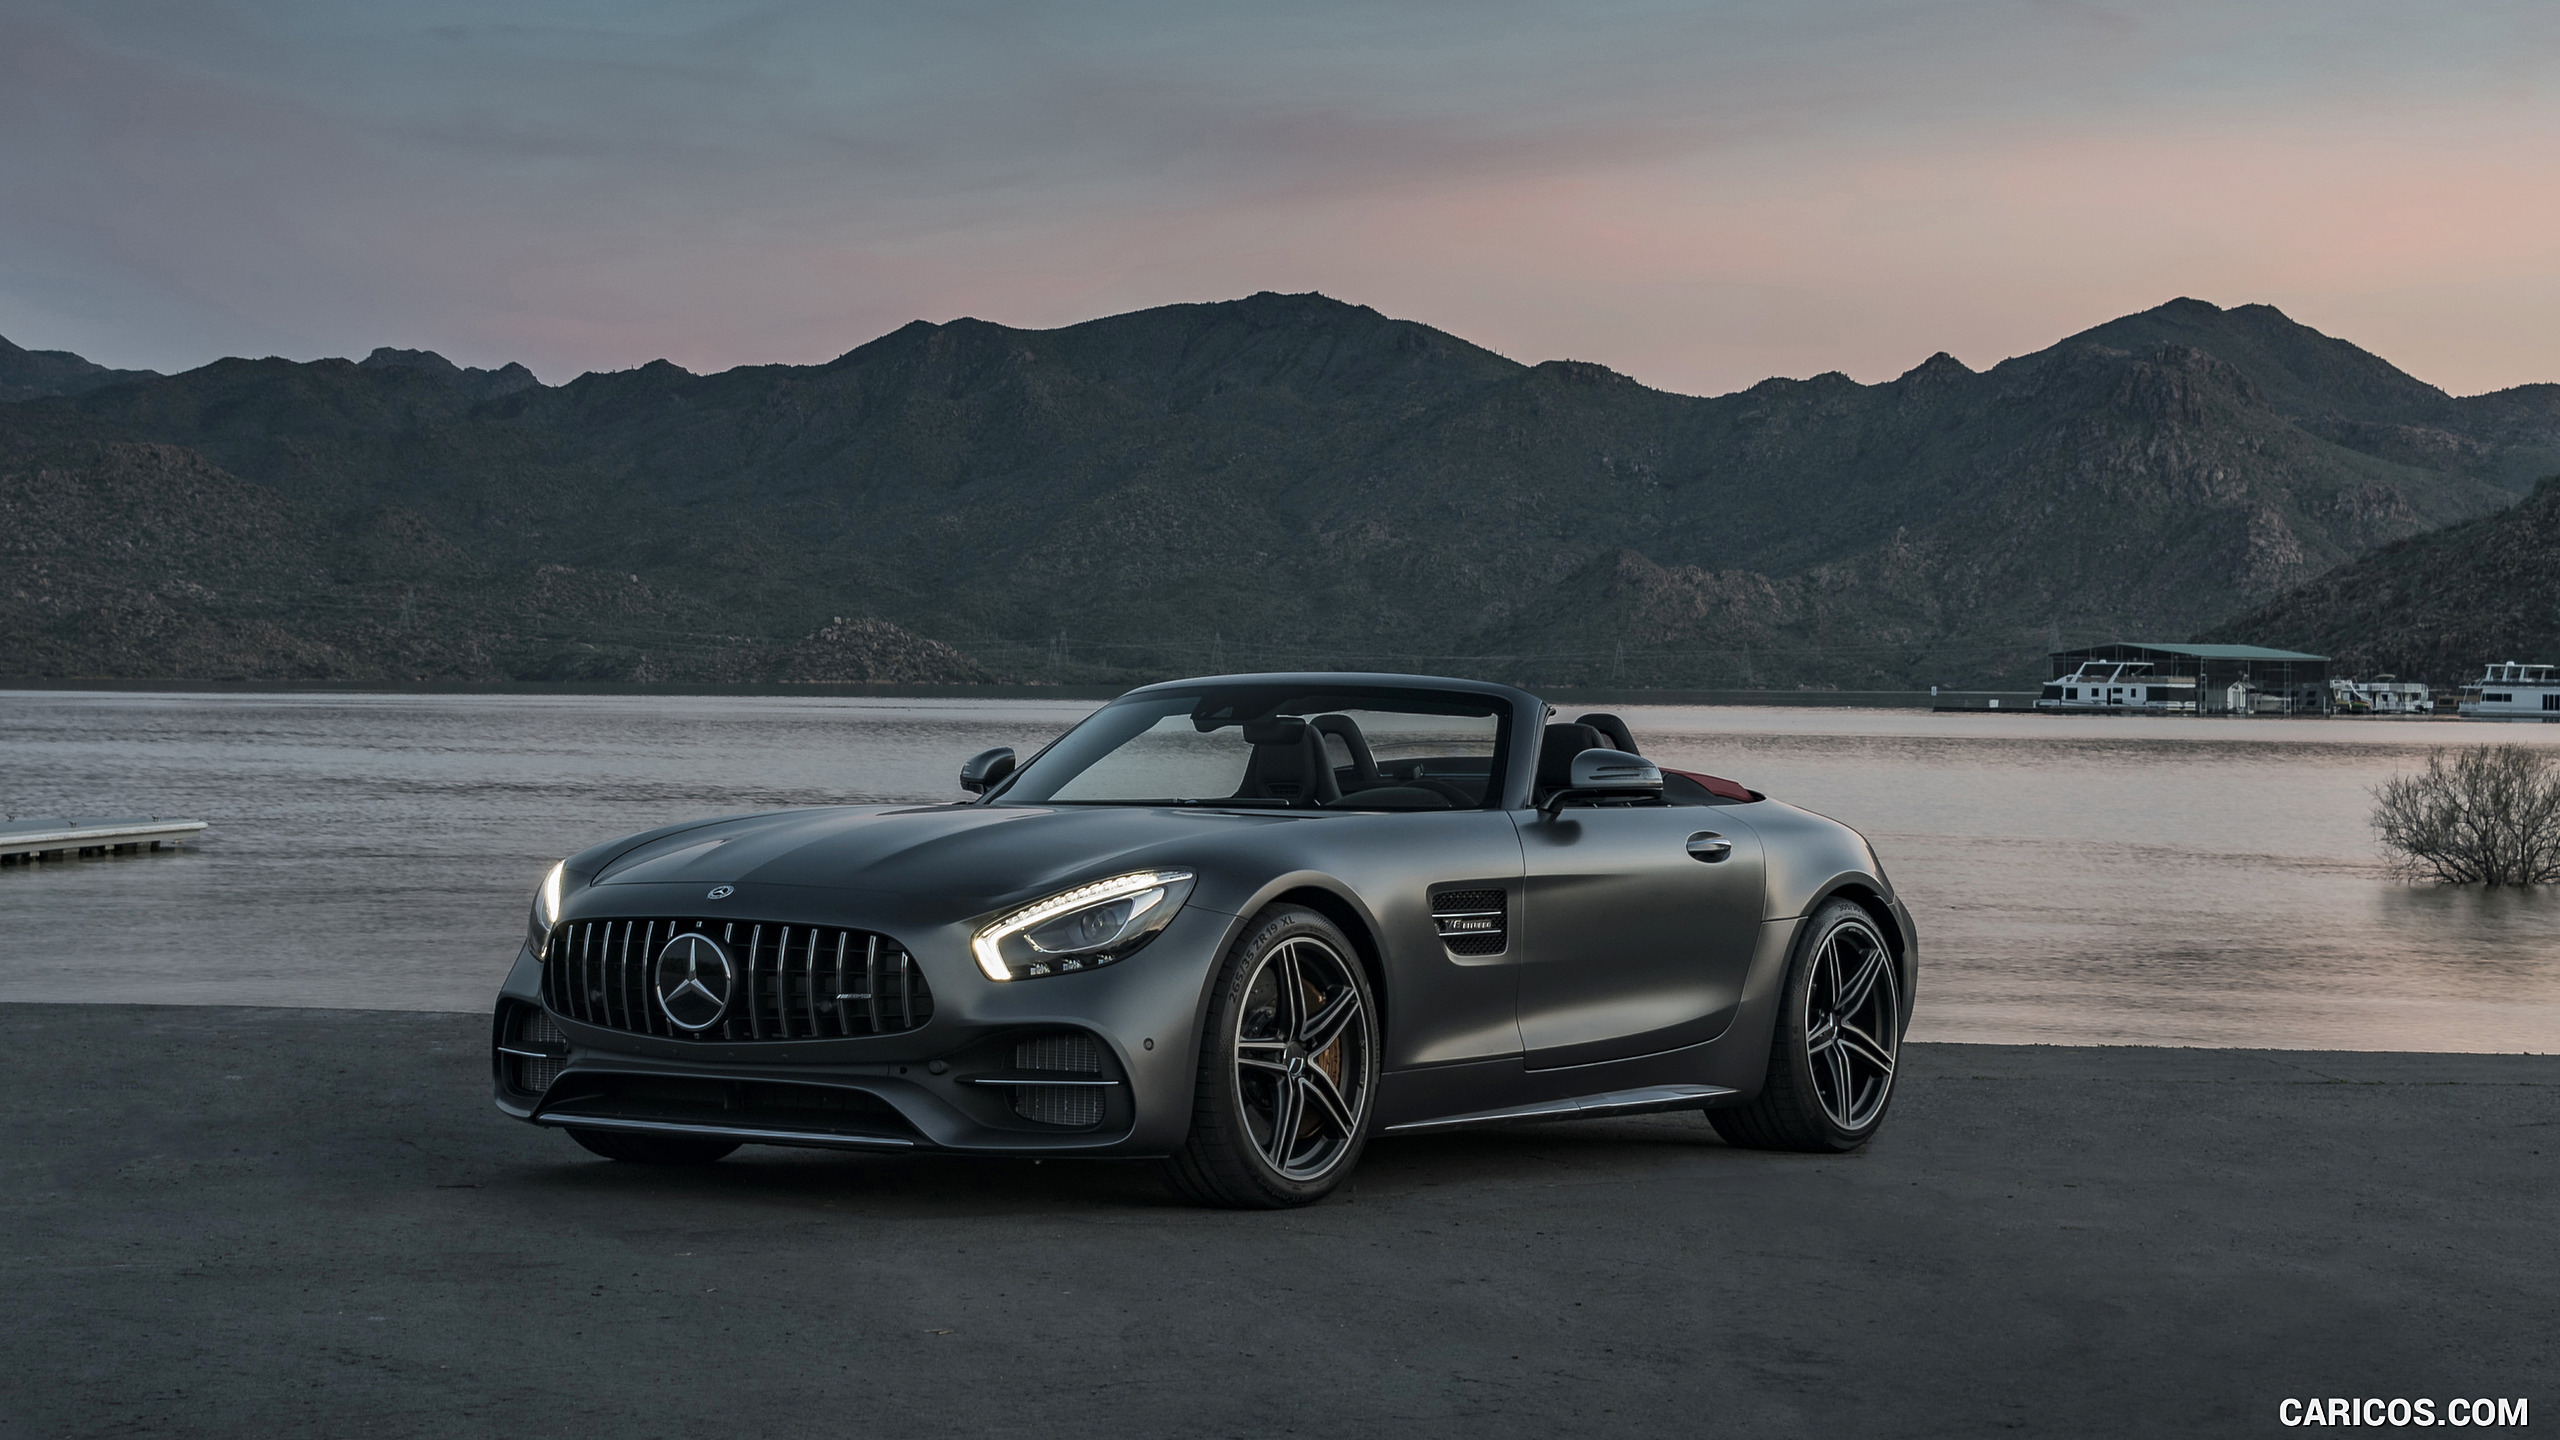 2018 Mercedes-AMG GT C Roadster - Front Three-Quarter, #329 of 350